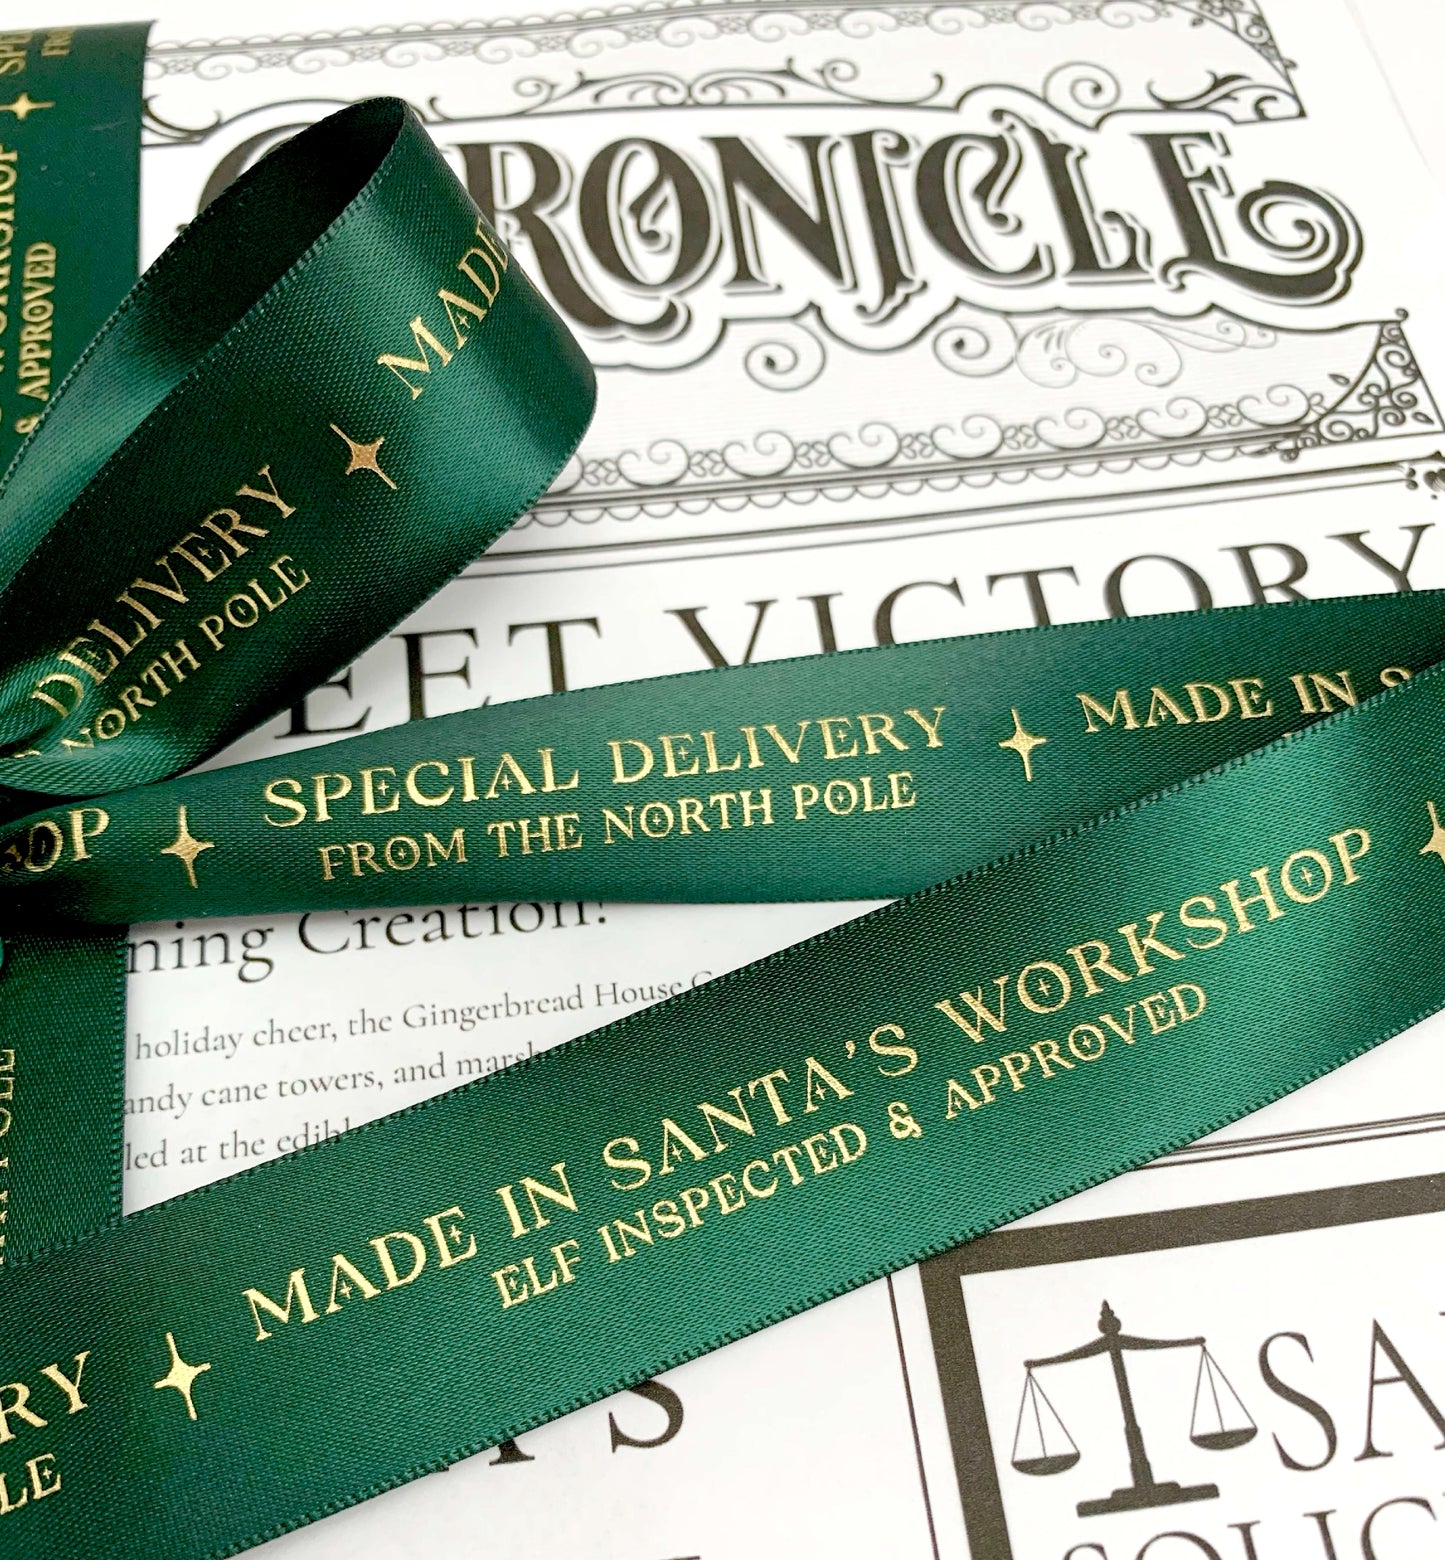 Special Delivery Made In Santa's Workshop Satin Ribbon, Green Gold, 25mm Woven Edge Satin Ribbon, Christmas Decorations Craft & Wrapping